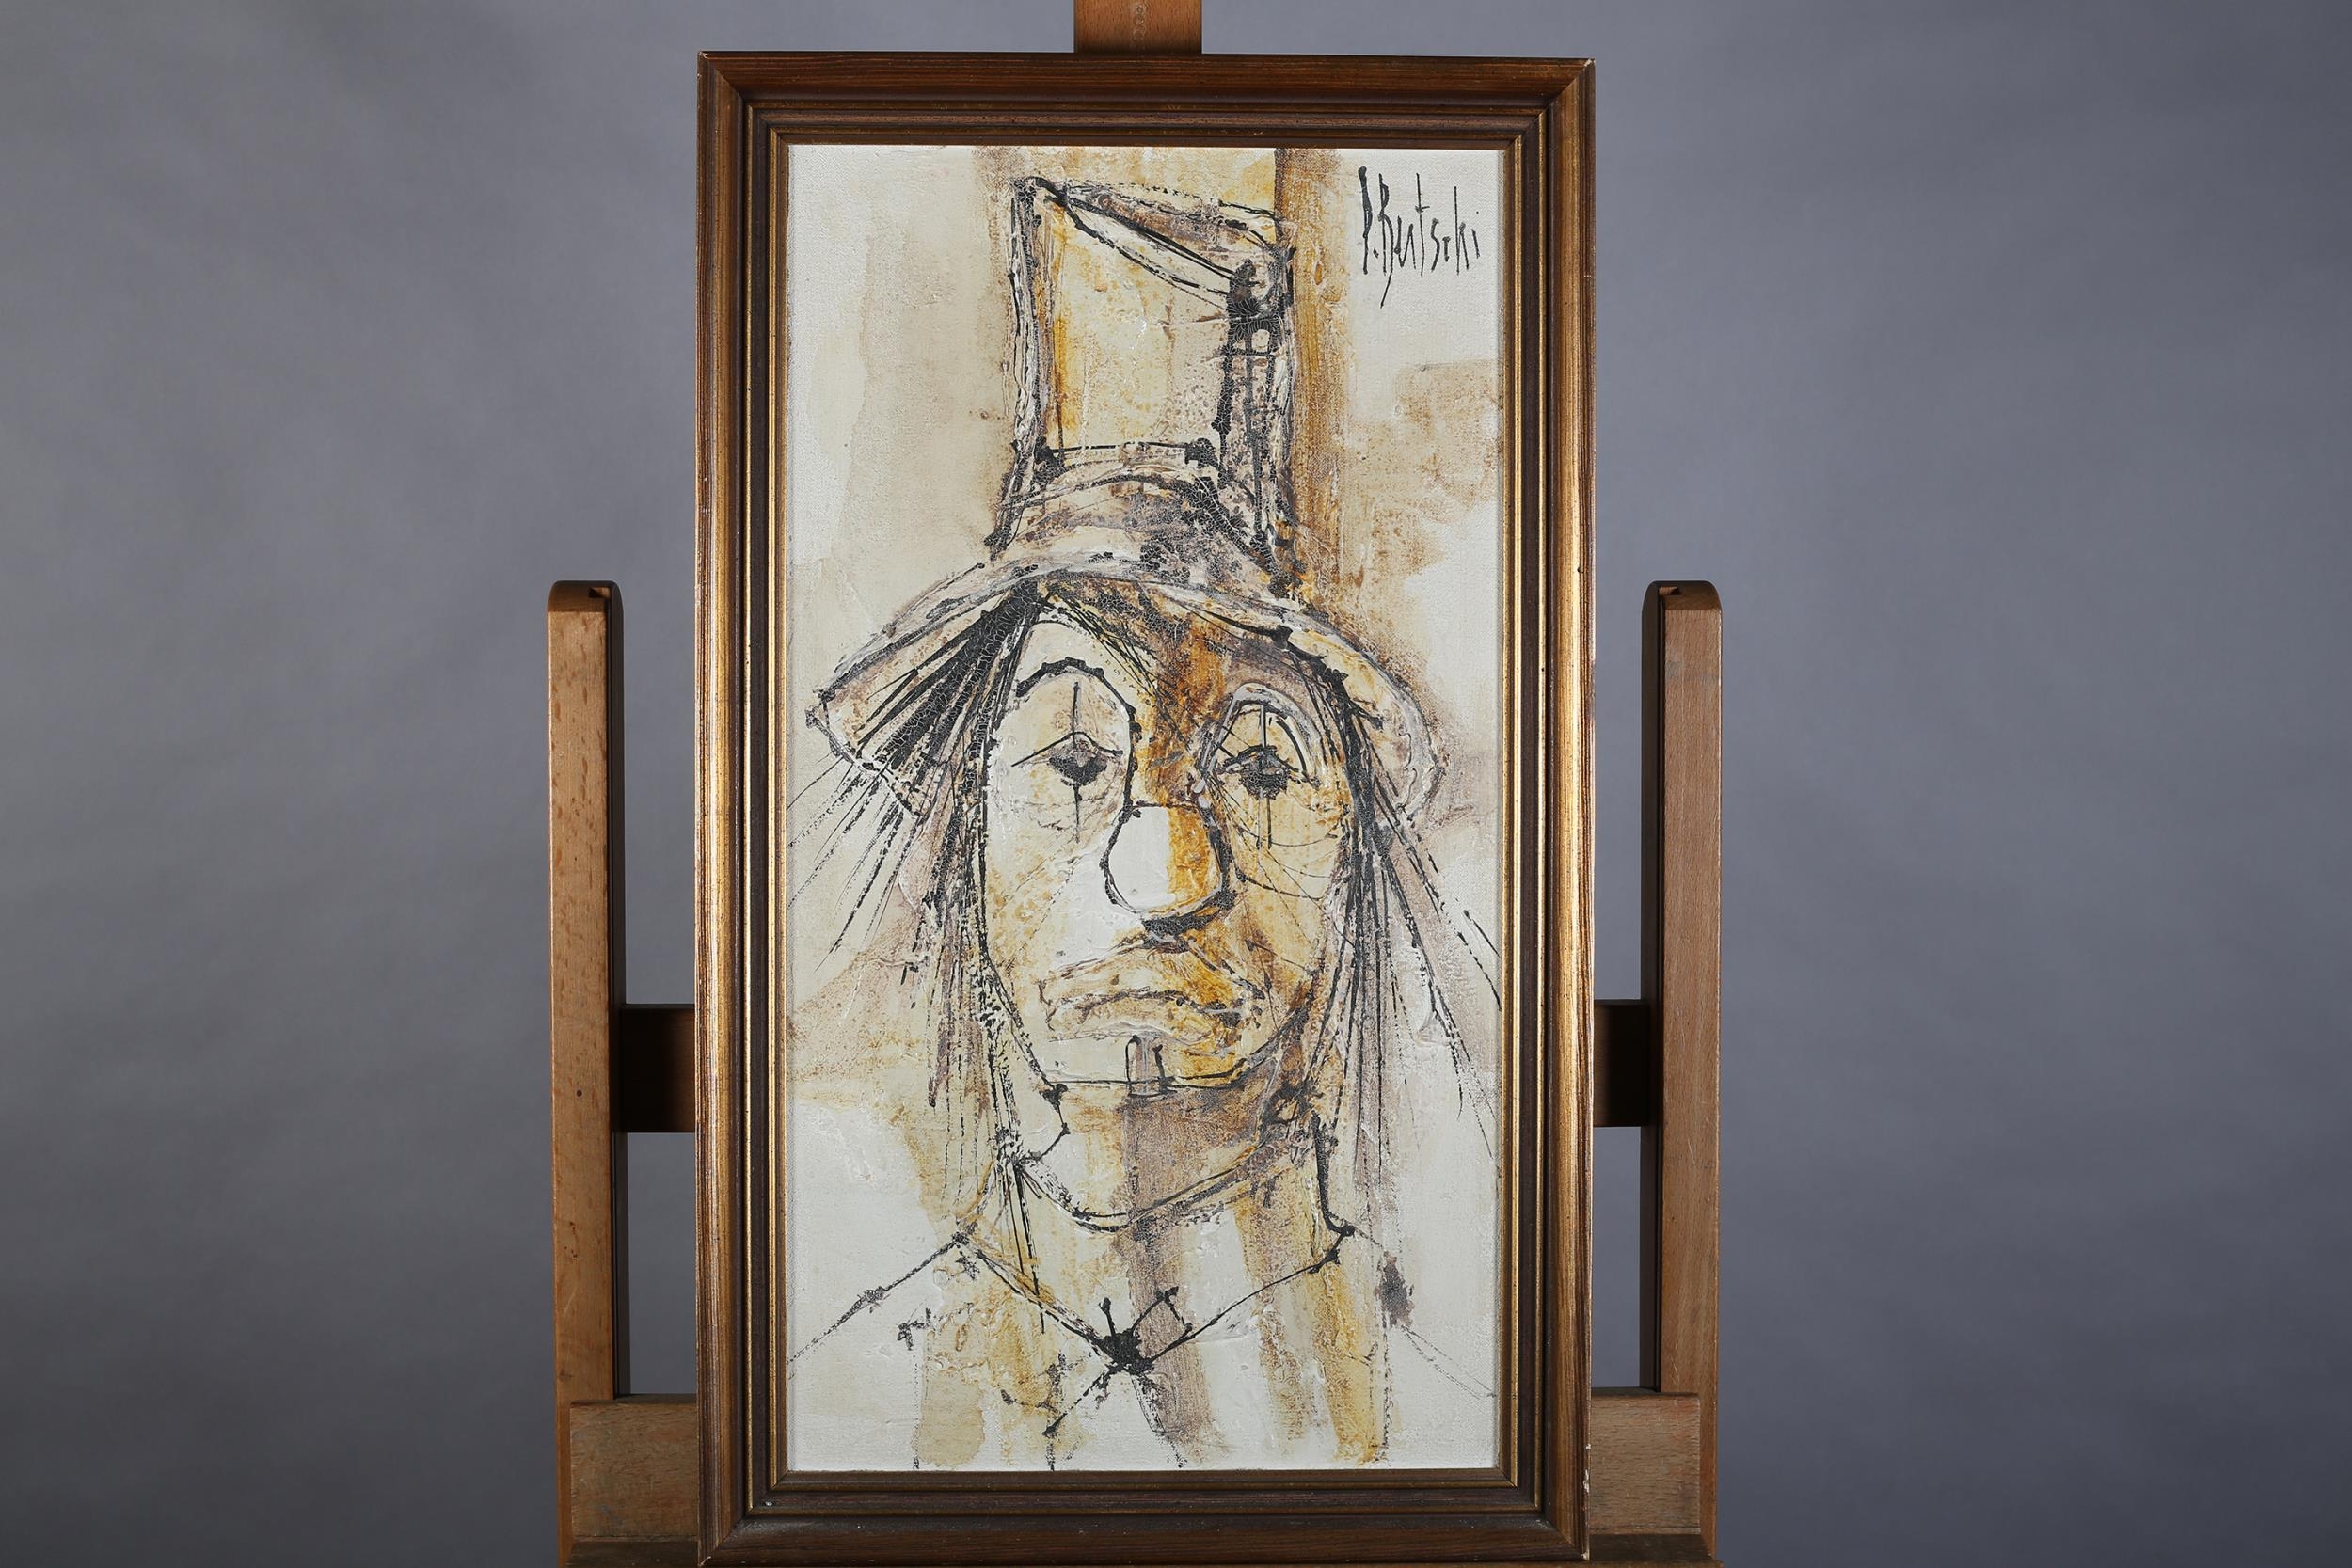 P Butschi mid-20th century, Clown, head and shoulders portrait, oil on canvas, signed to upper